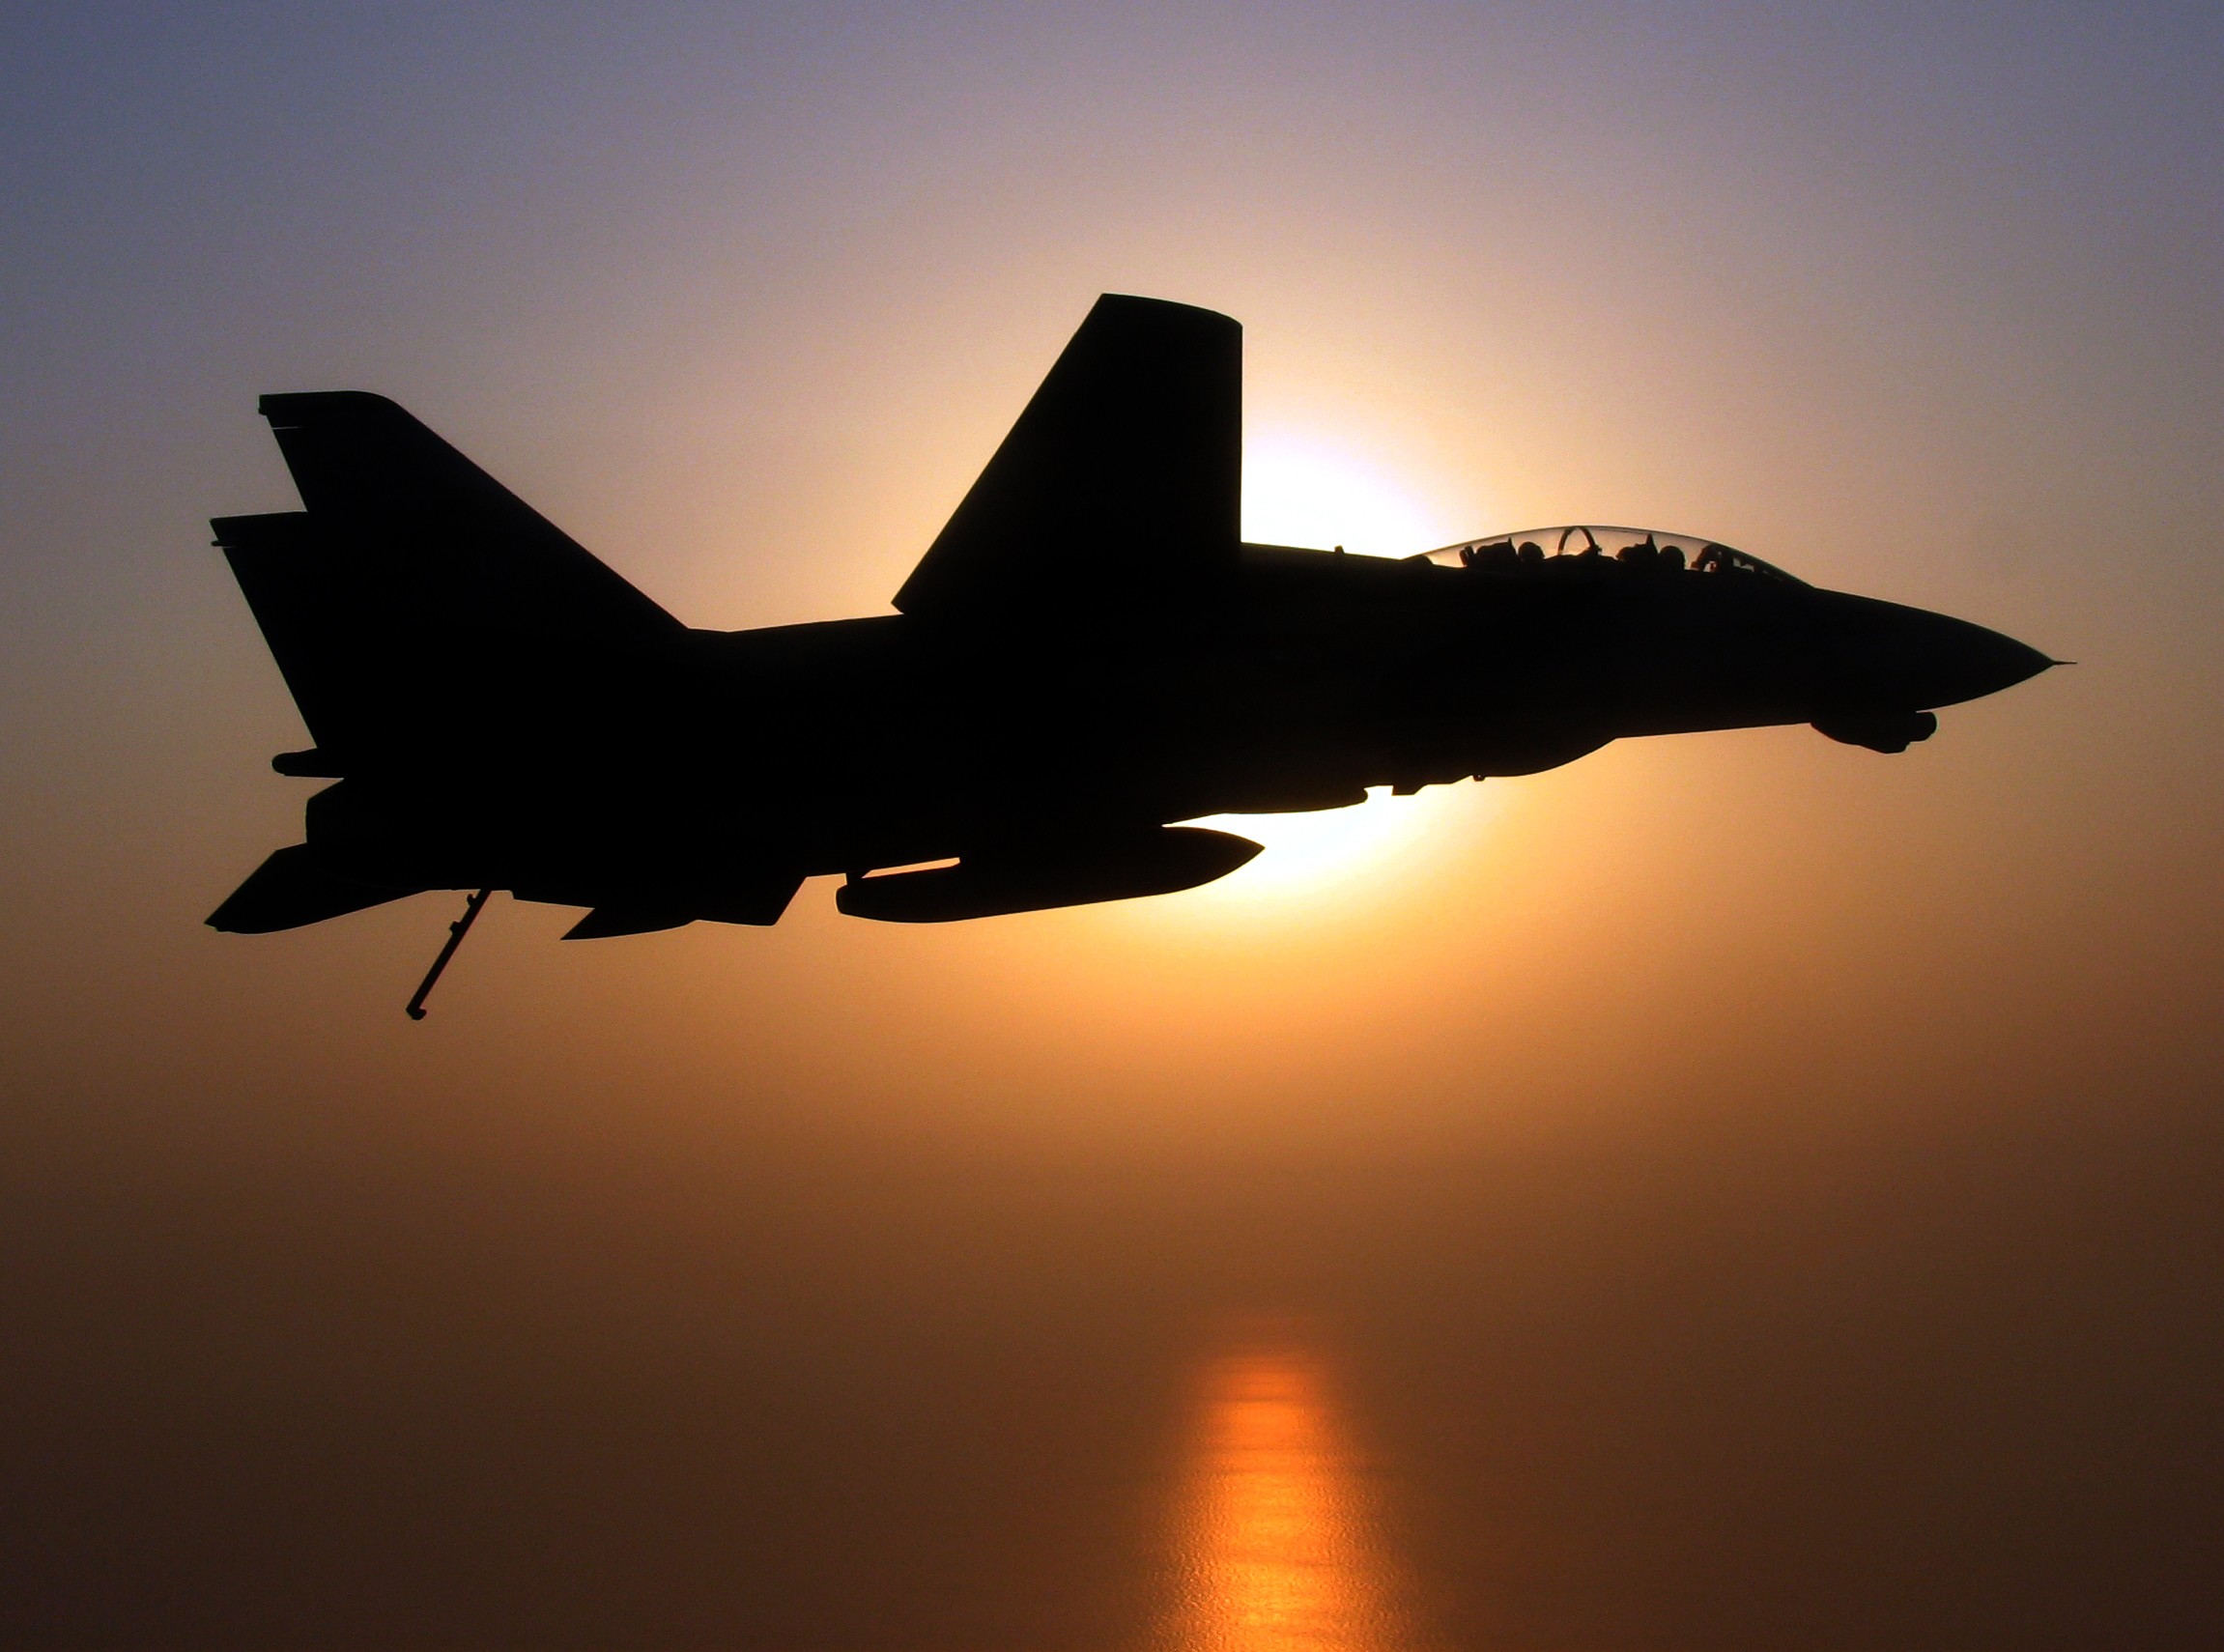 General 2302x1710 F-14 Tomcat military aircraft military jet fighter silhouette vehicle military vehicle American aircraft